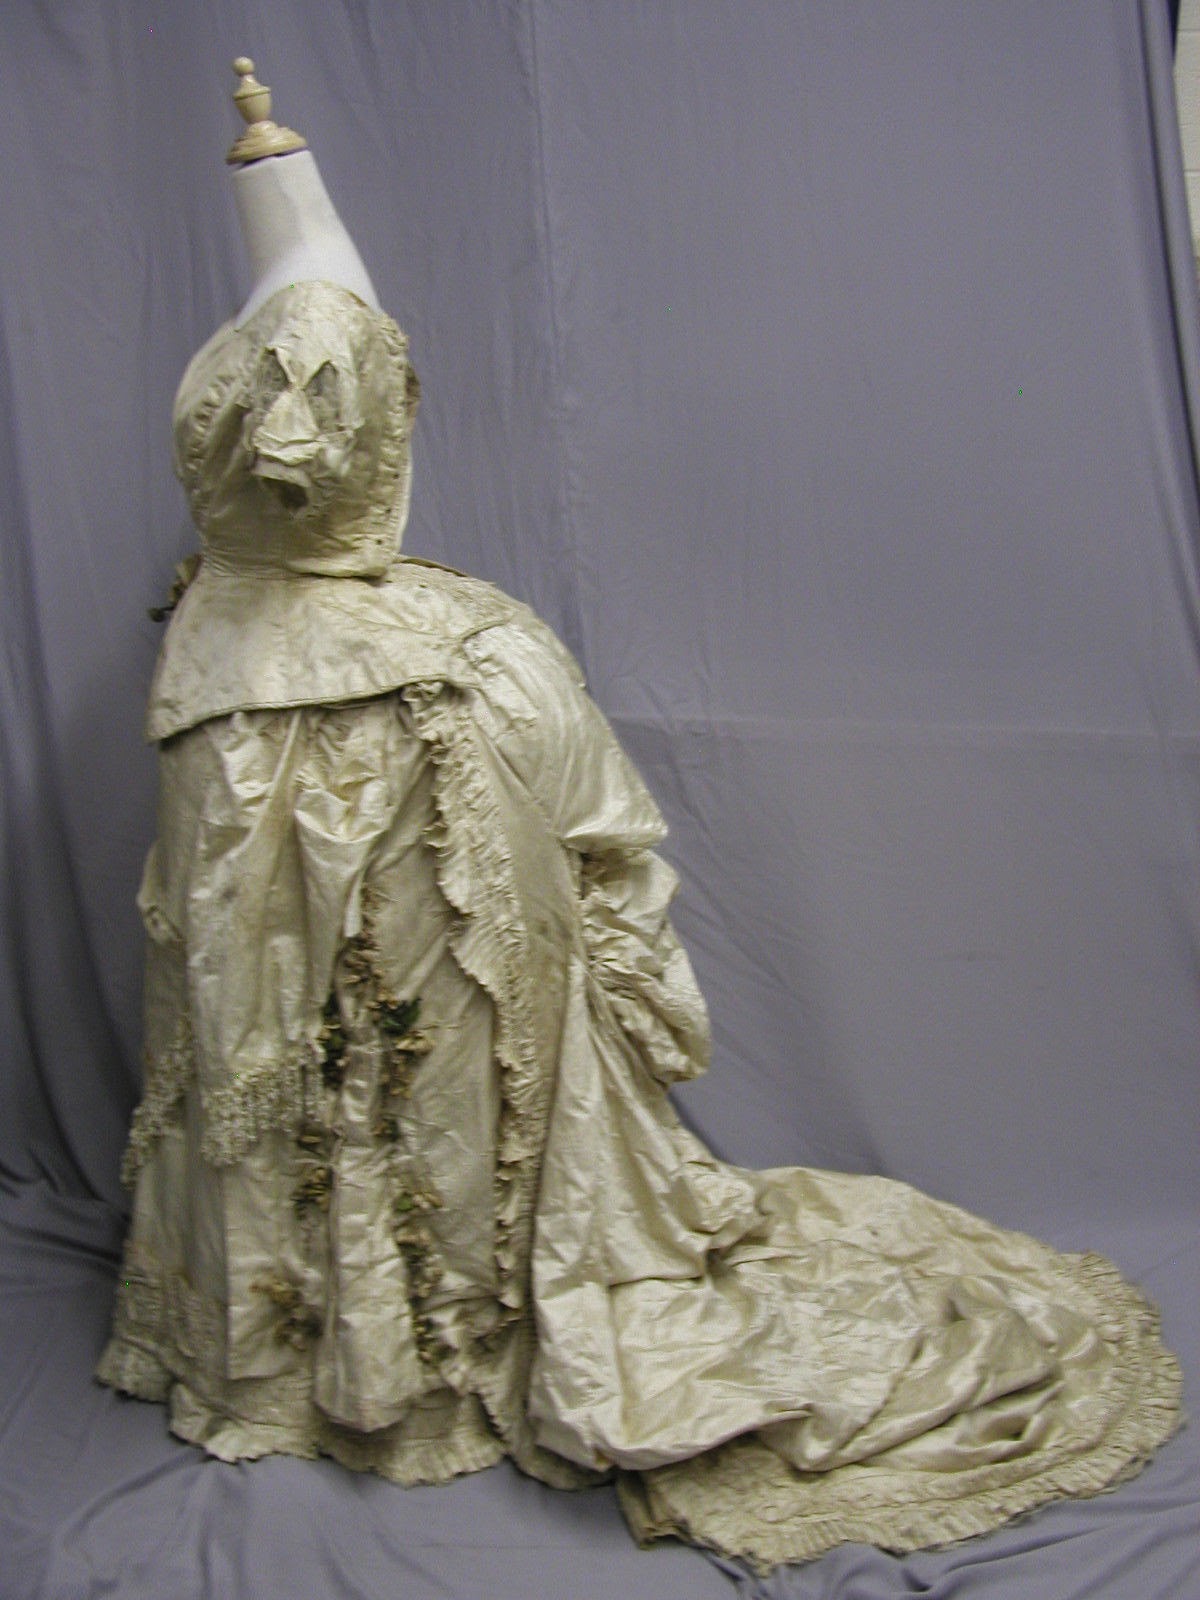 All The Pretty Dresses: Mid 1870's Wedding Gown